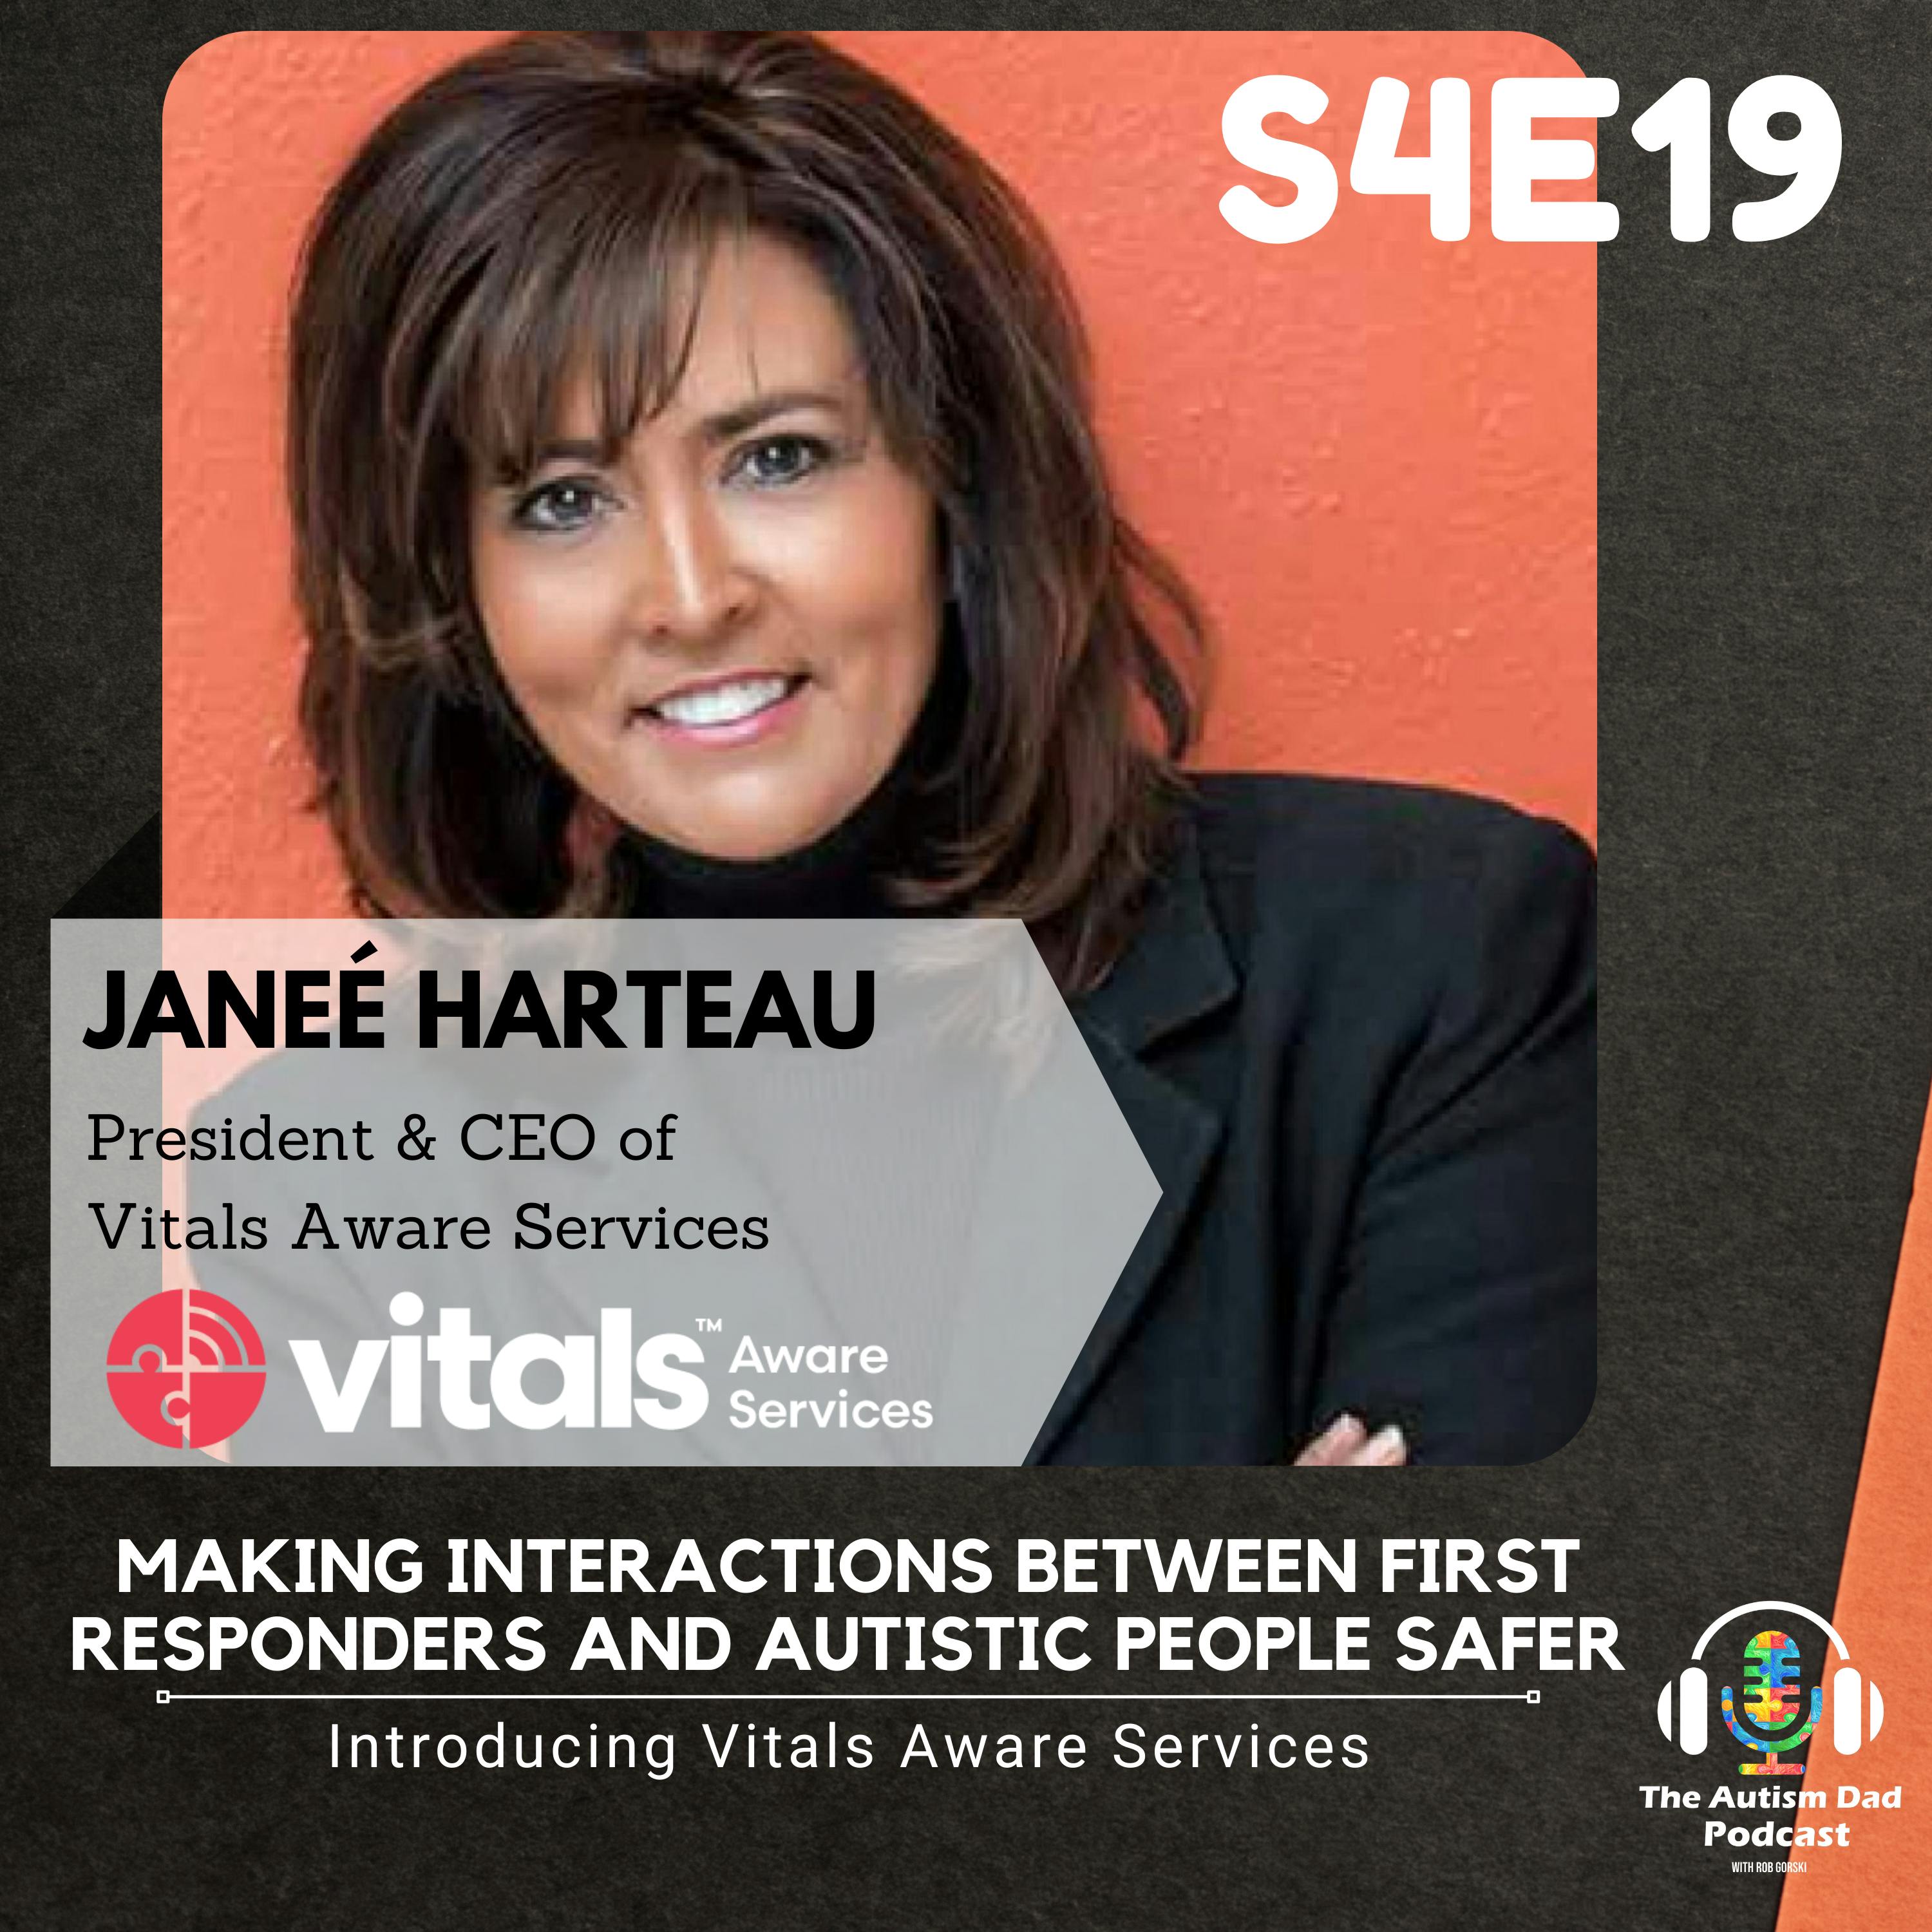 Making Interactions Between First Responders and Autistic People Safer (feat Janeé Harteau) S4E19 Image